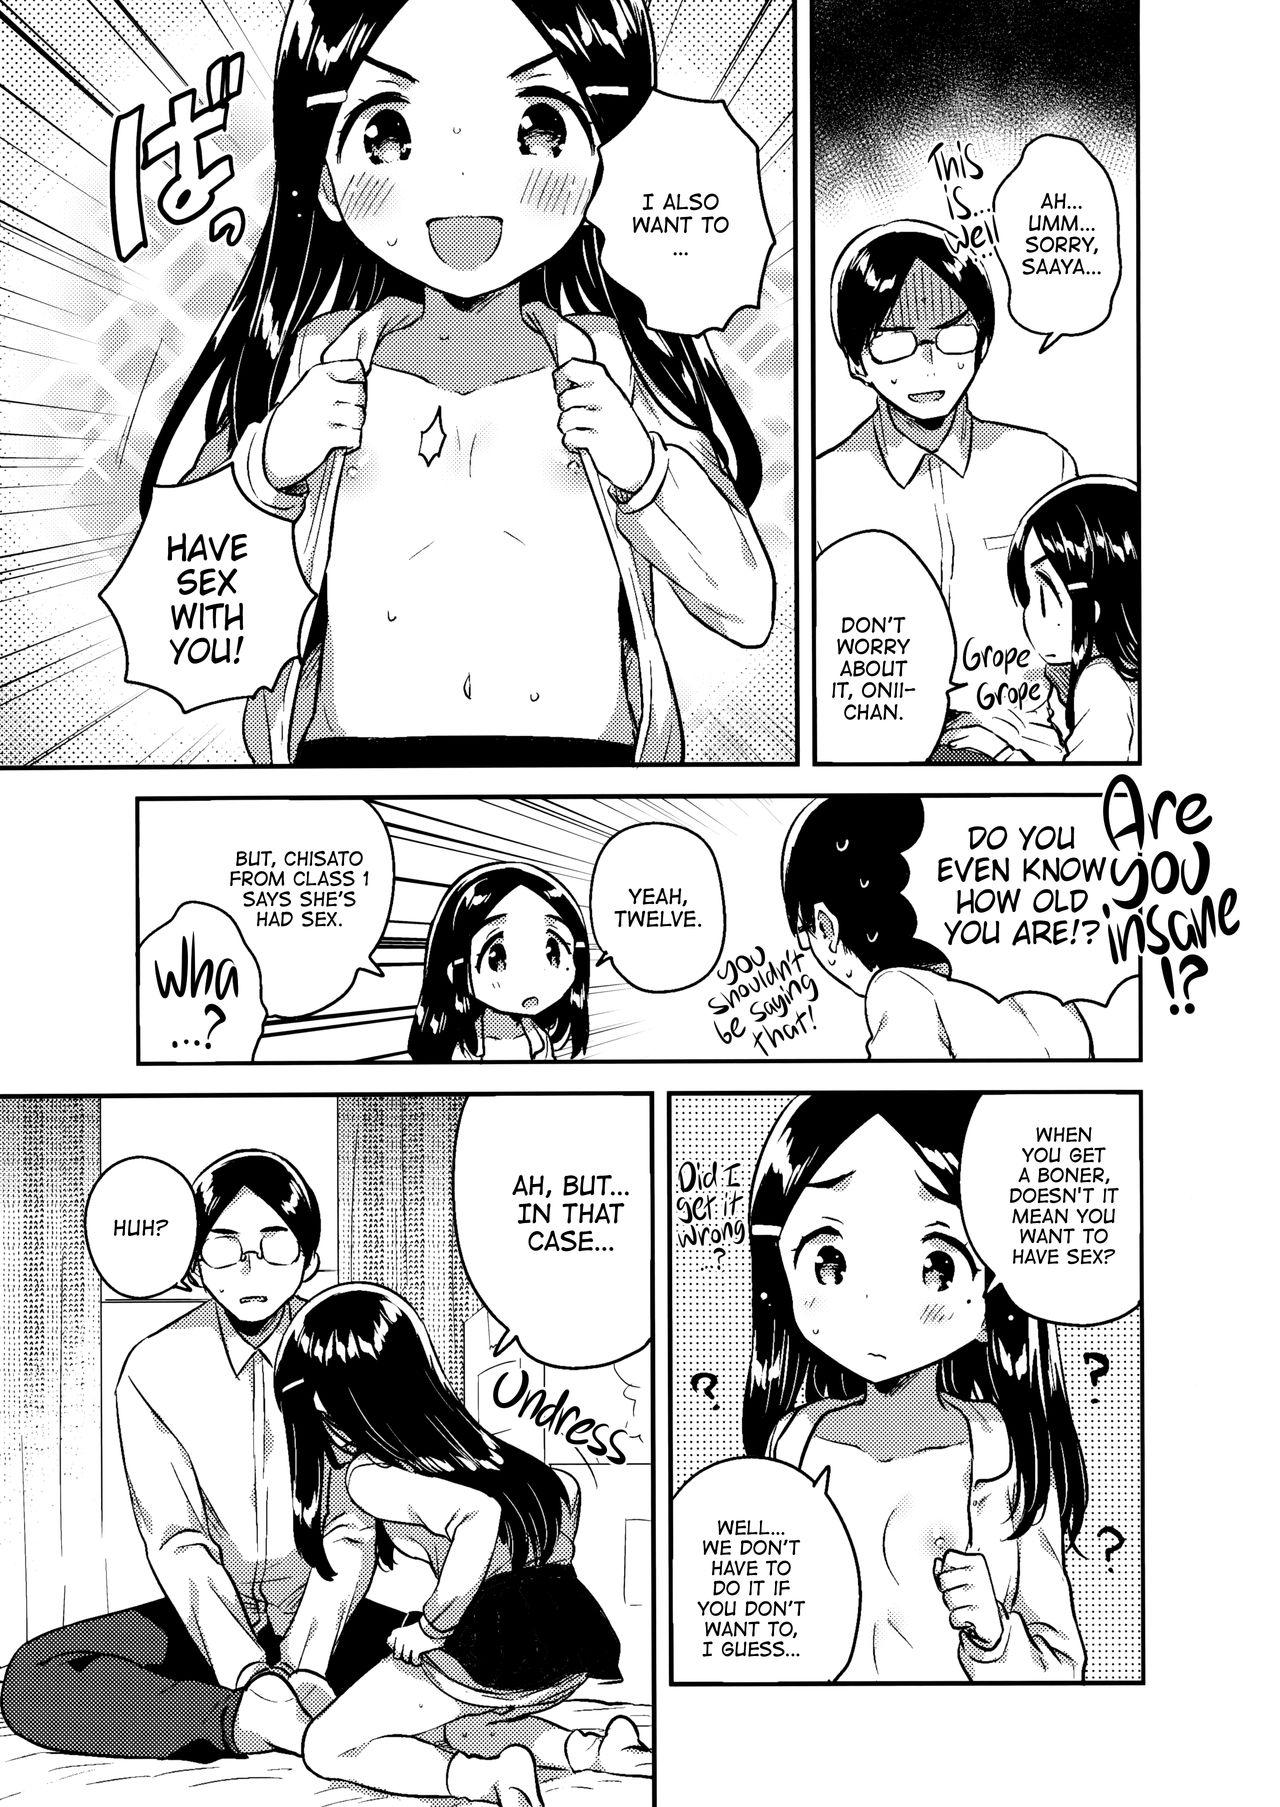 Imouto wa Mistress| My Little Sister Is My Mistress <First Chapter> 8